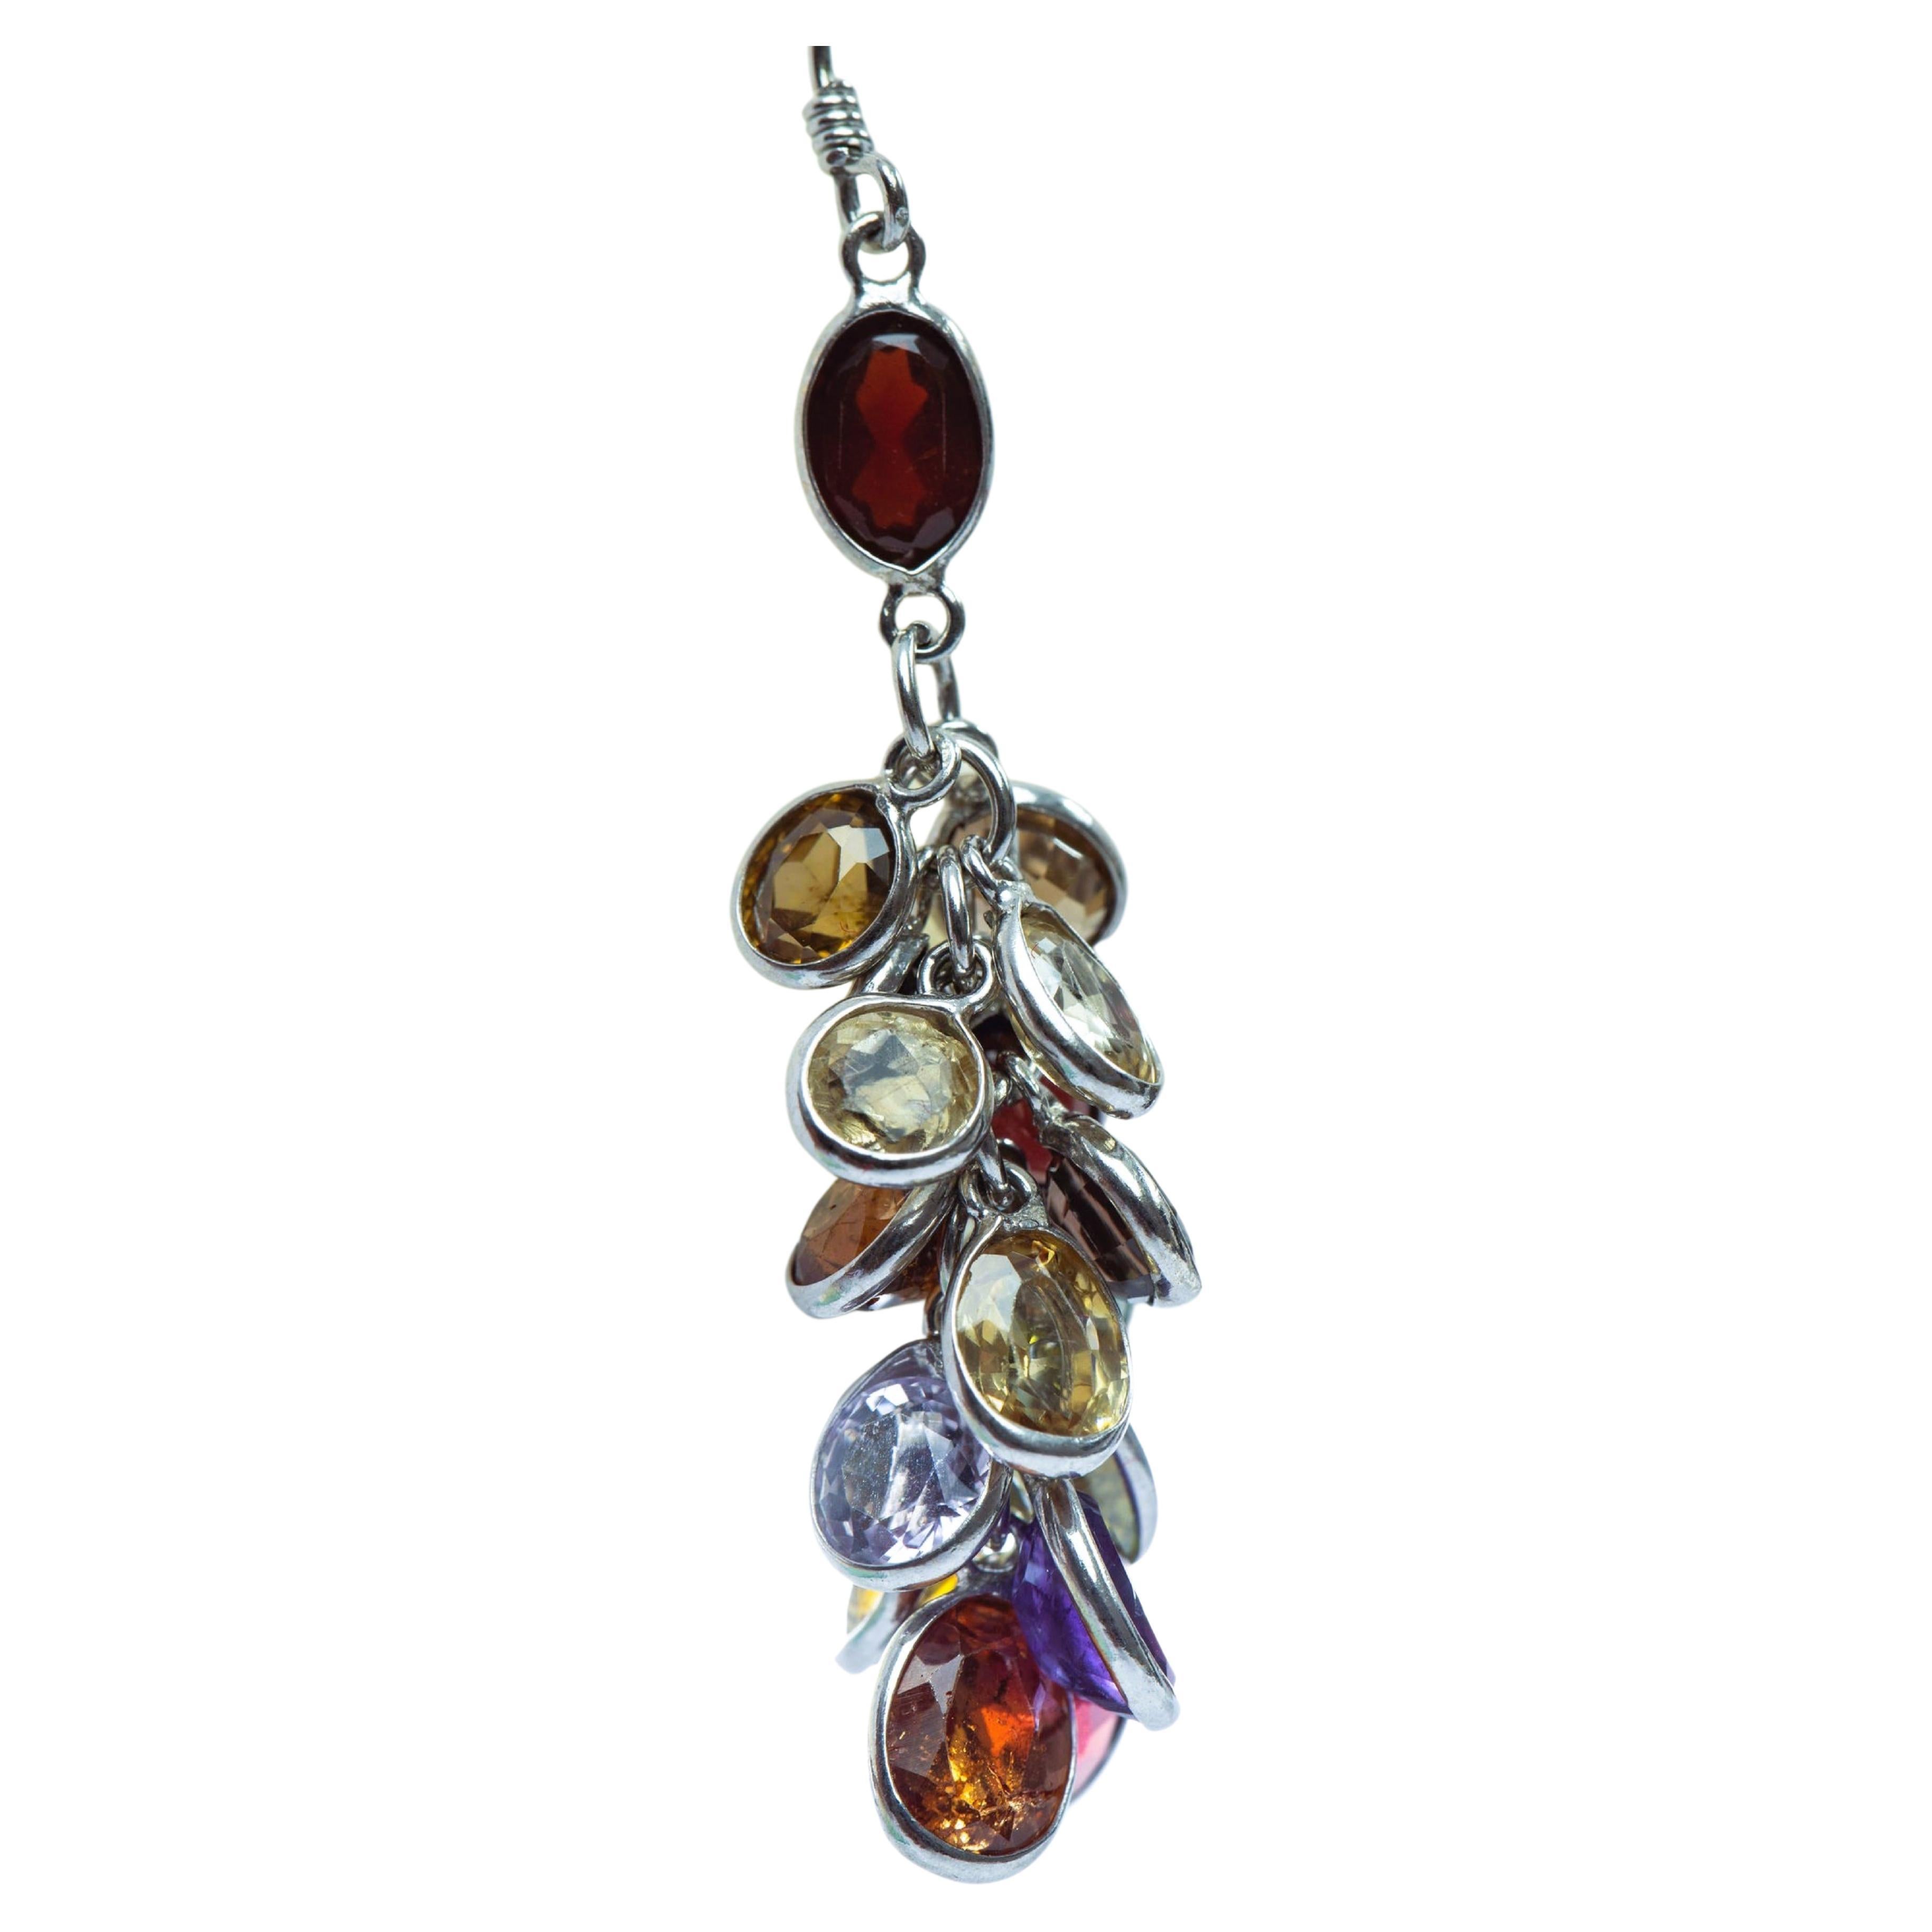 Natural Garnet Amethyst Spinel Mix Gem Cluster Earrings Sterling Silver In New Condition For Sale In Sheridan, WY